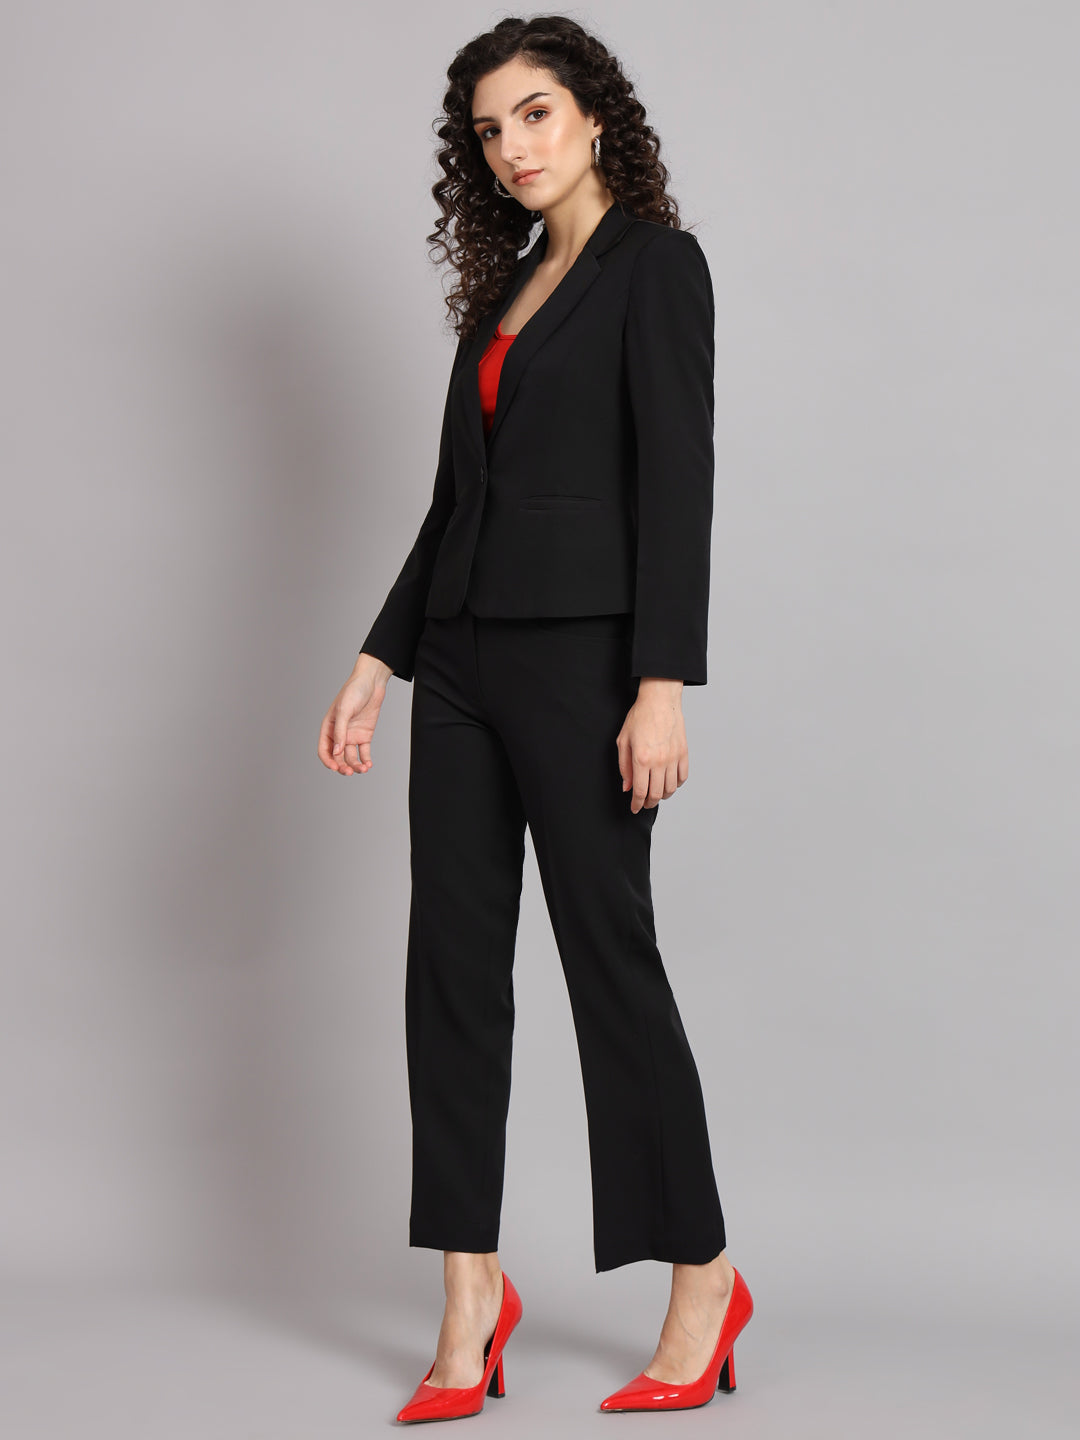 Buy SIRIL Women's Co-ord Set Lycra Blazer Inner Top and Trouser Pant Set |  Top and Bottom Set | 3 Piece Set (574TK10875-S_Black) at Amazon.in